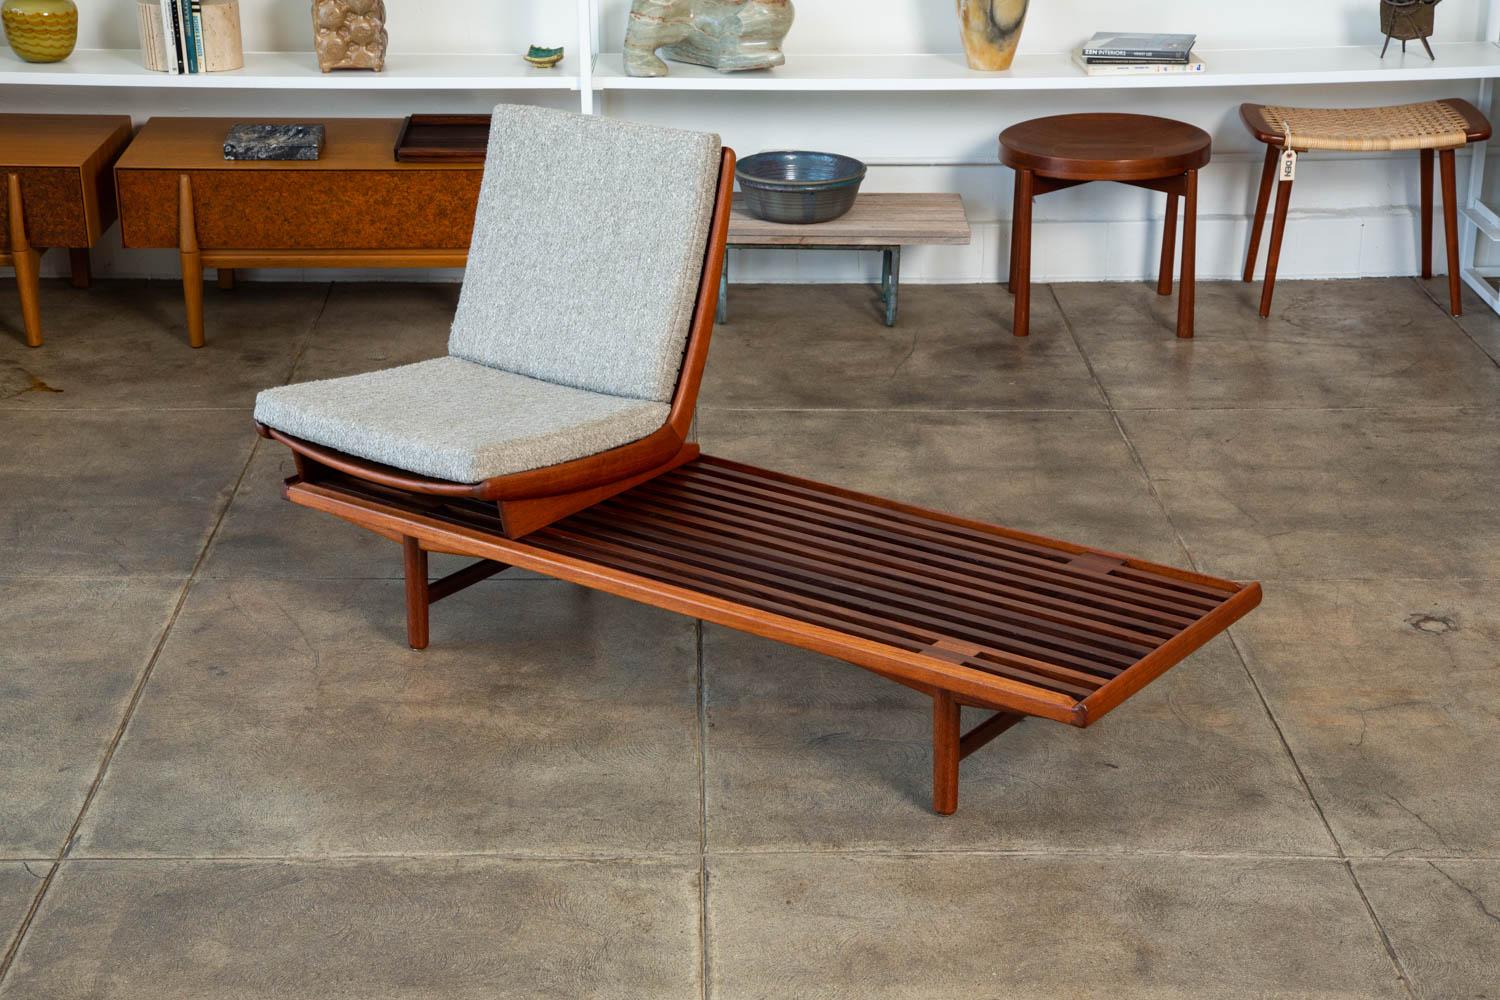 A teak slat bench with modular detachable seat by Westnofa, Norway, circa 1950s. This bench features an oiled teak frame with tongue and groove joinery on the exterior corners. The adjustable and removable chair has new Belgian wool bouclé cushions